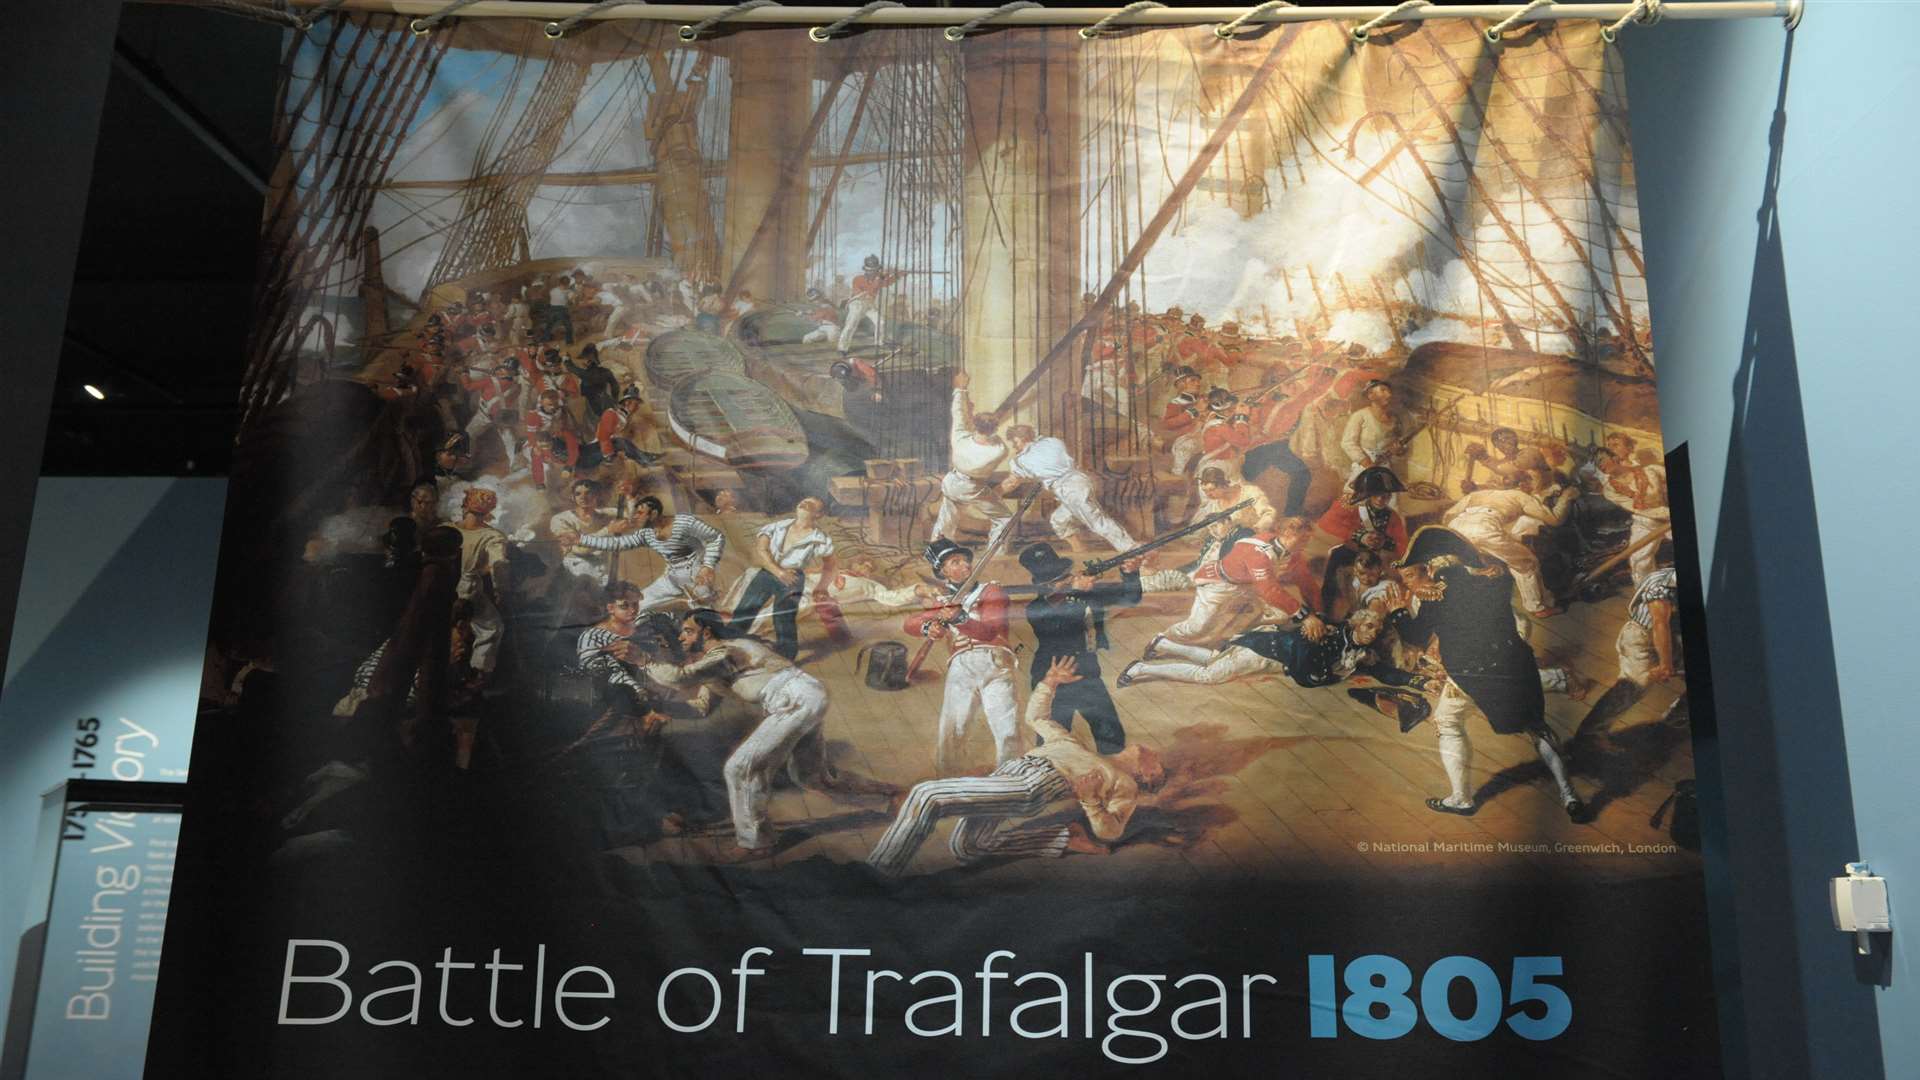 HMS Victory The Untold Story exhibition - The Battle of Trafalgar 1805